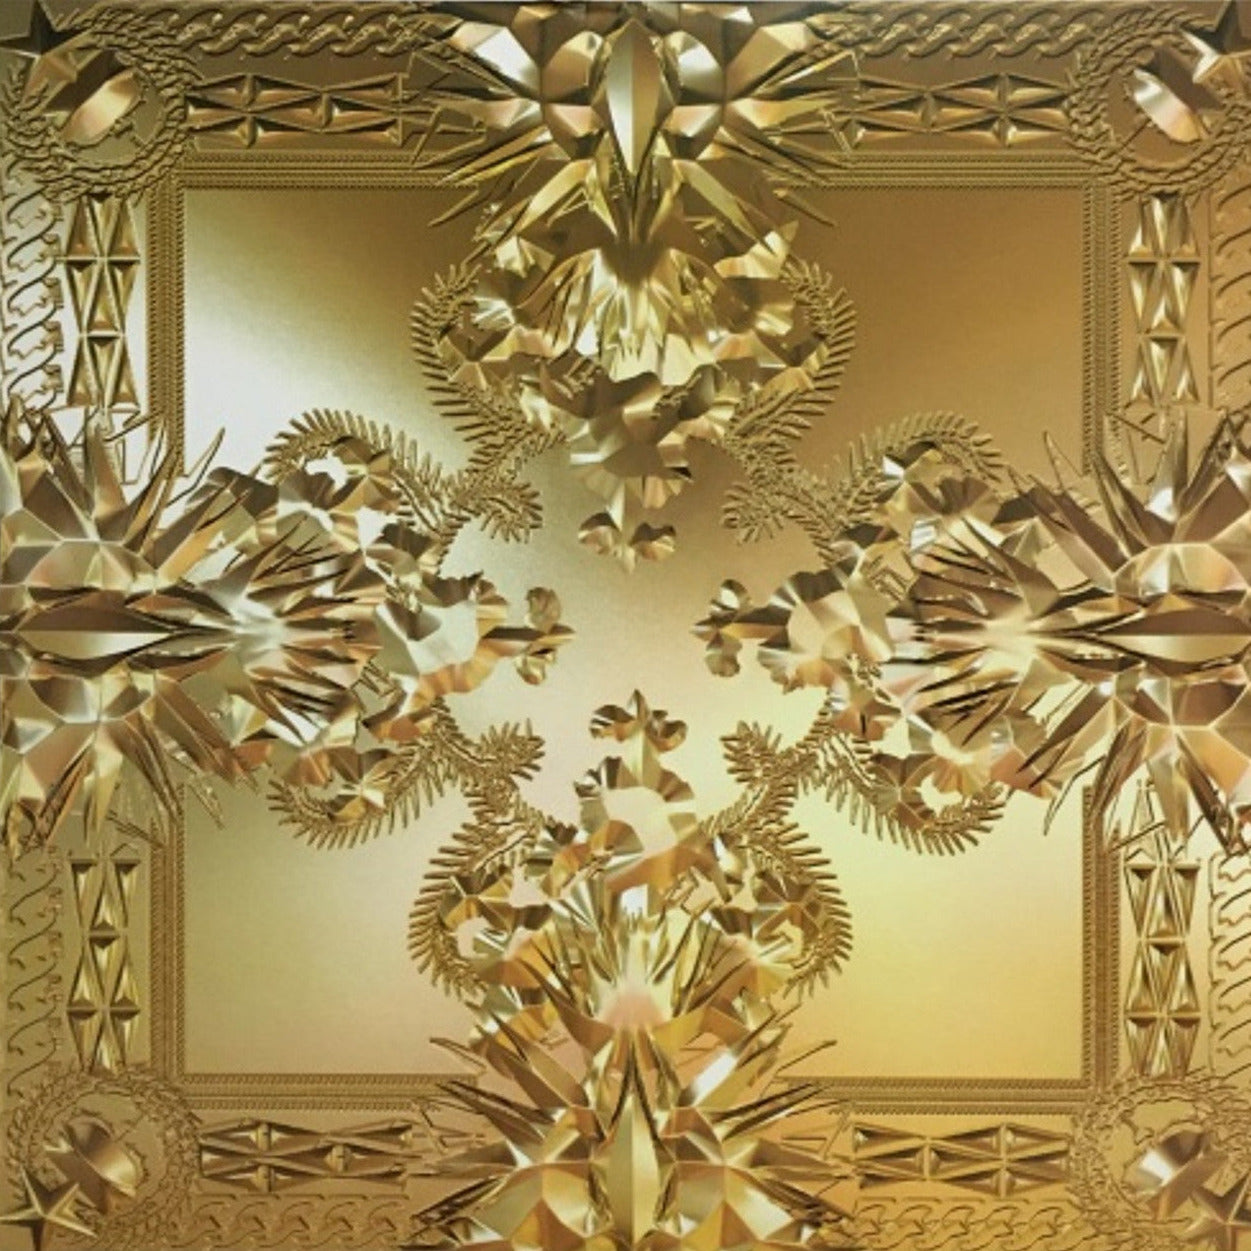 Jay-Z & Kanye West - Watch The Throne (Limited Edition, Picture Discs) (2 LP) - Joco Records